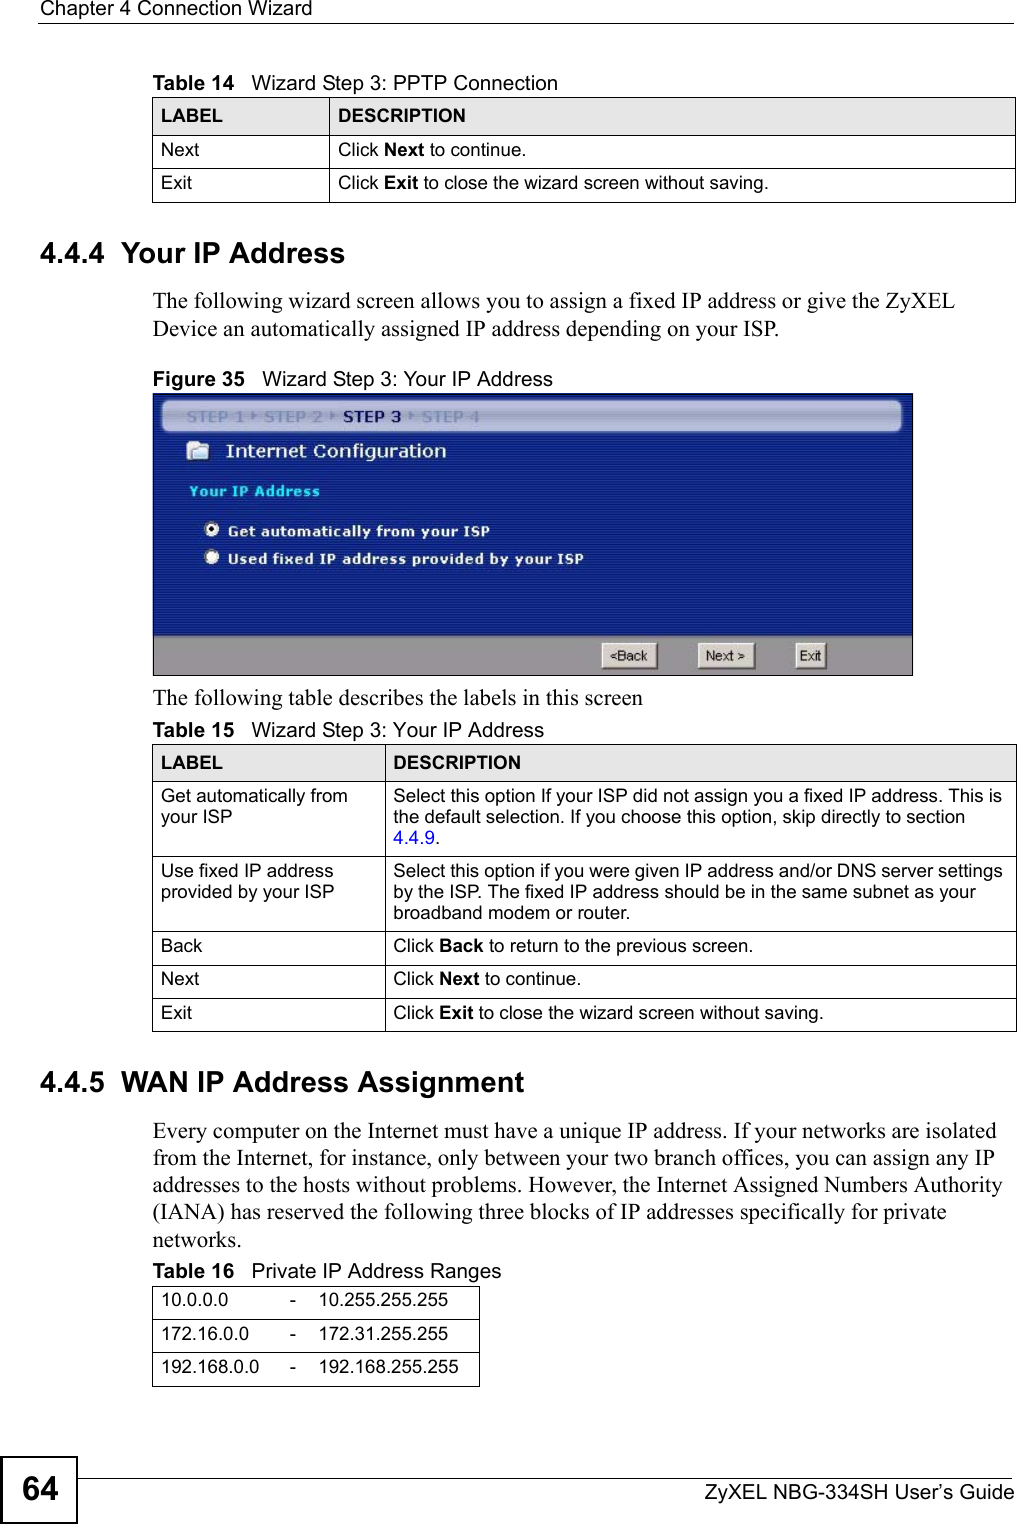 Chapter 4 Connection WizardZyXEL NBG-334SH User’s Guide644.4.4  Your IP AddressThe following wizard screen allows you to assign a fixed IP address or give the ZyXEL Device an automatically assigned IP address depending on your ISP.Figure 35   Wizard Step 3: Your IP AddressThe following table describes the labels in this screen4.4.5  WAN IP Address AssignmentEvery computer on the Internet must have a unique IP address. If your networks are isolated from the Internet, for instance, only between your two branch offices, you can assign any IP addresses to the hosts without problems. However, the Internet Assigned Numbers Authority (IANA) has reserved the following three blocks of IP addresses specifically for private networks.Next Click Next to continue. Exit Click Exit to close the wizard screen without saving.Table 14   Wizard Step 3: PPTP ConnectionLABEL DESCRIPTIONTable 15   Wizard Step 3: Your IP AddressLABEL DESCRIPTIONGet automatically from your ISP Select this option If your ISP did not assign you a fixed IP address. This is the default selection. If you choose this option, skip directly to section 4.4.9.Use fixed IP address provided by your ISPSelect this option if you were given IP address and/or DNS server settings by the ISP. The fixed IP address should be in the same subnet as your broadband modem or router. Back Click Back to return to the previous screen.Next Click Next to continue. Exit Click Exit to close the wizard screen without saving.Table 16   Private IP Address Ranges10.0.0.0 -10.255.255.255172.16.0.0 -172.31.255.255192.168.0.0 -192.168.255.255